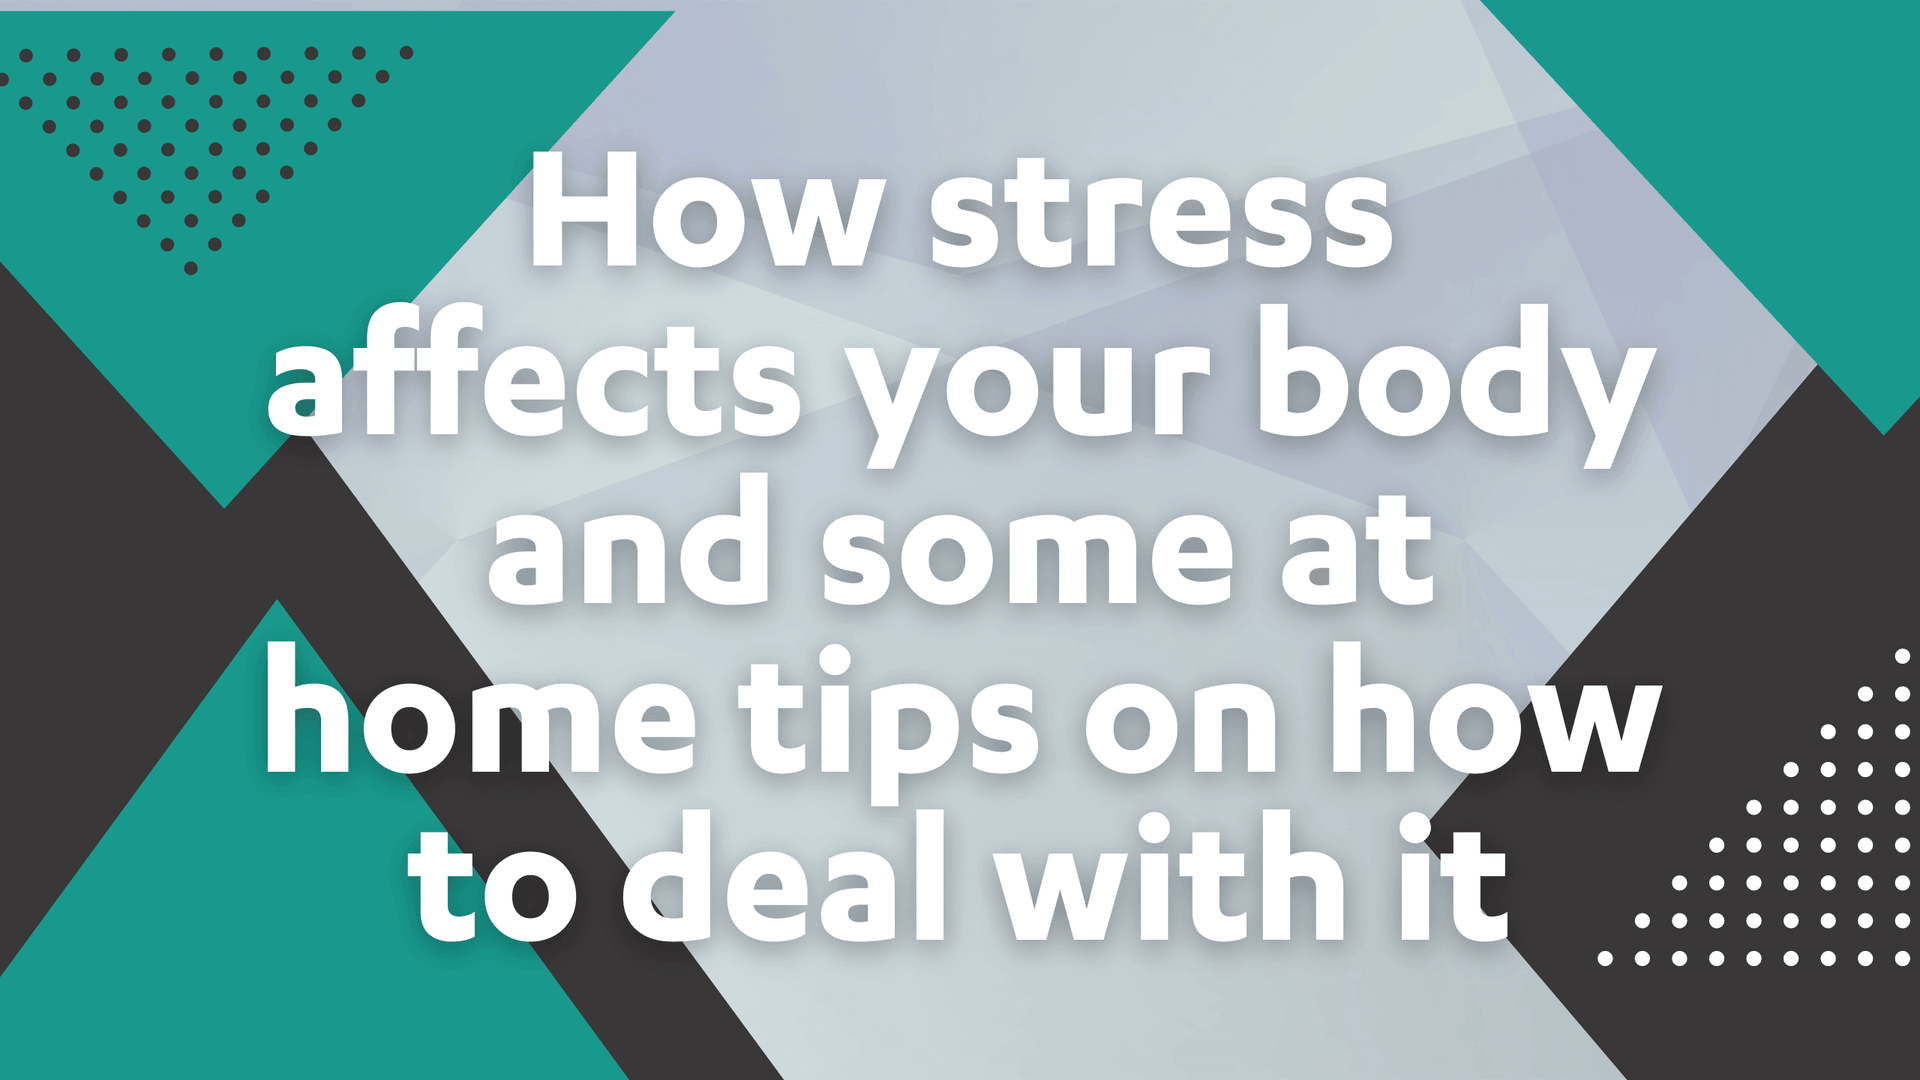 Dr Kez ChiroLab How stress affects your body at home tips to relieve stress